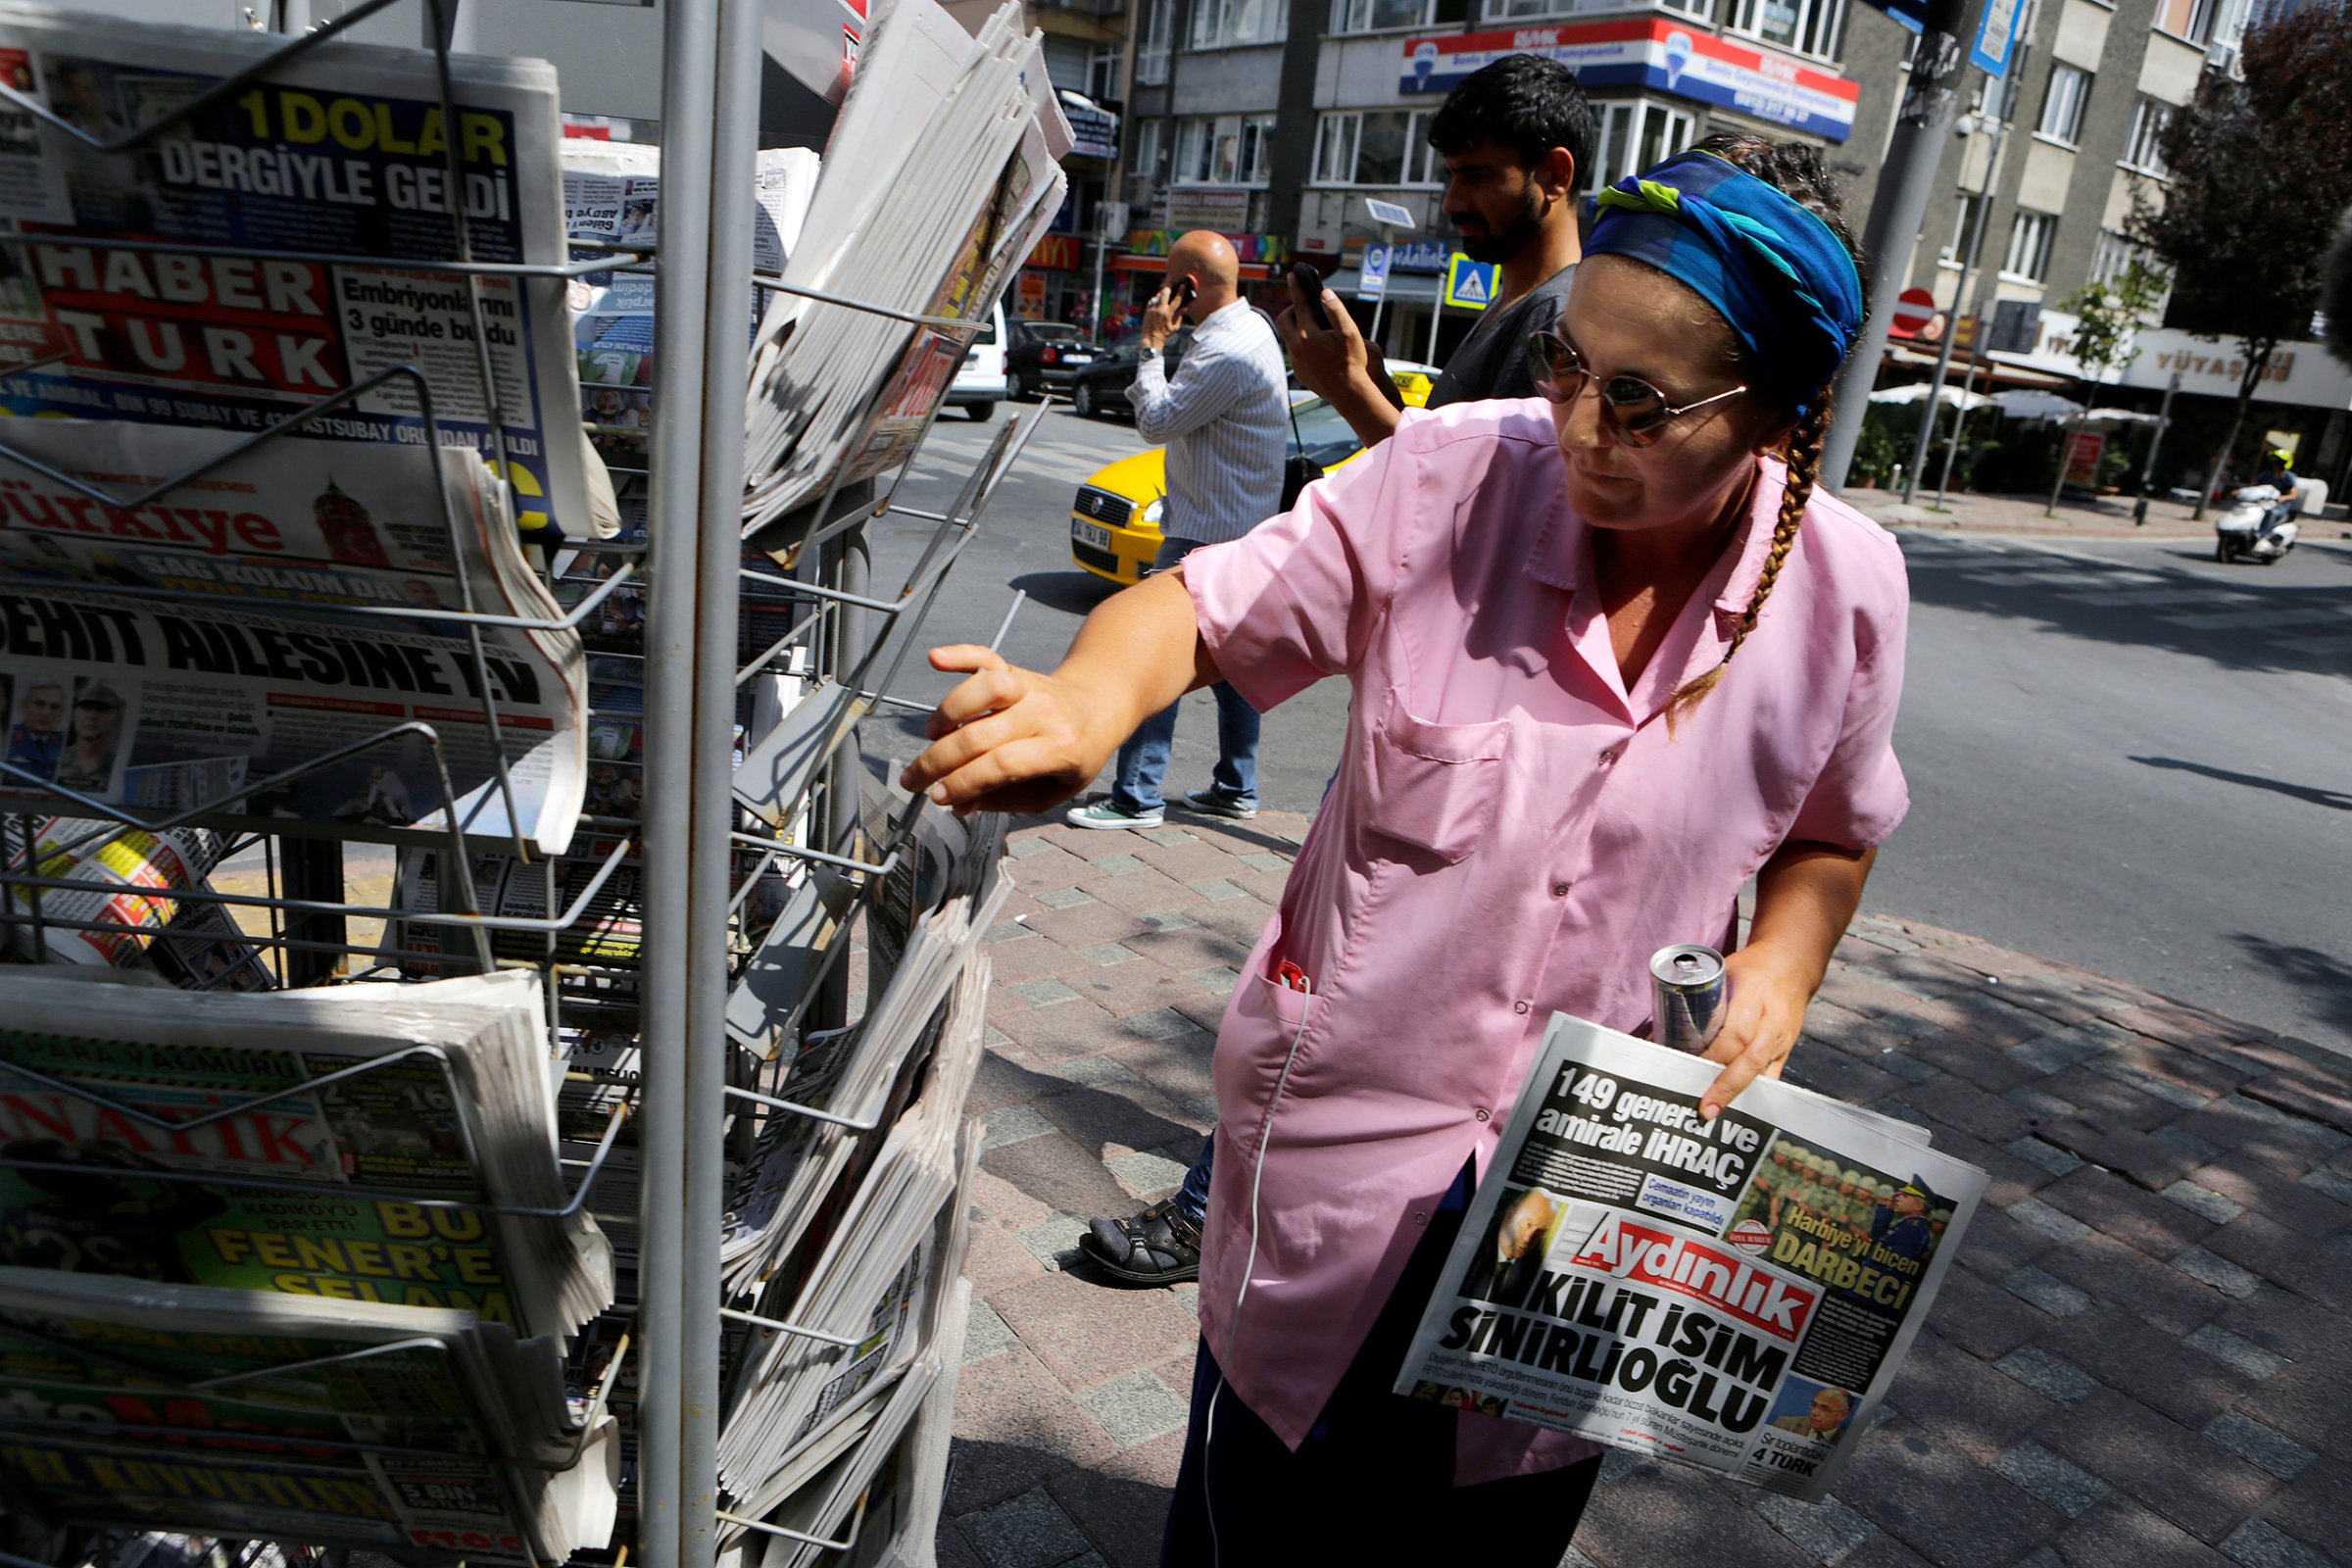 A woman buys a newspaper from a kiosk in Istanbul on July 28, 2016.